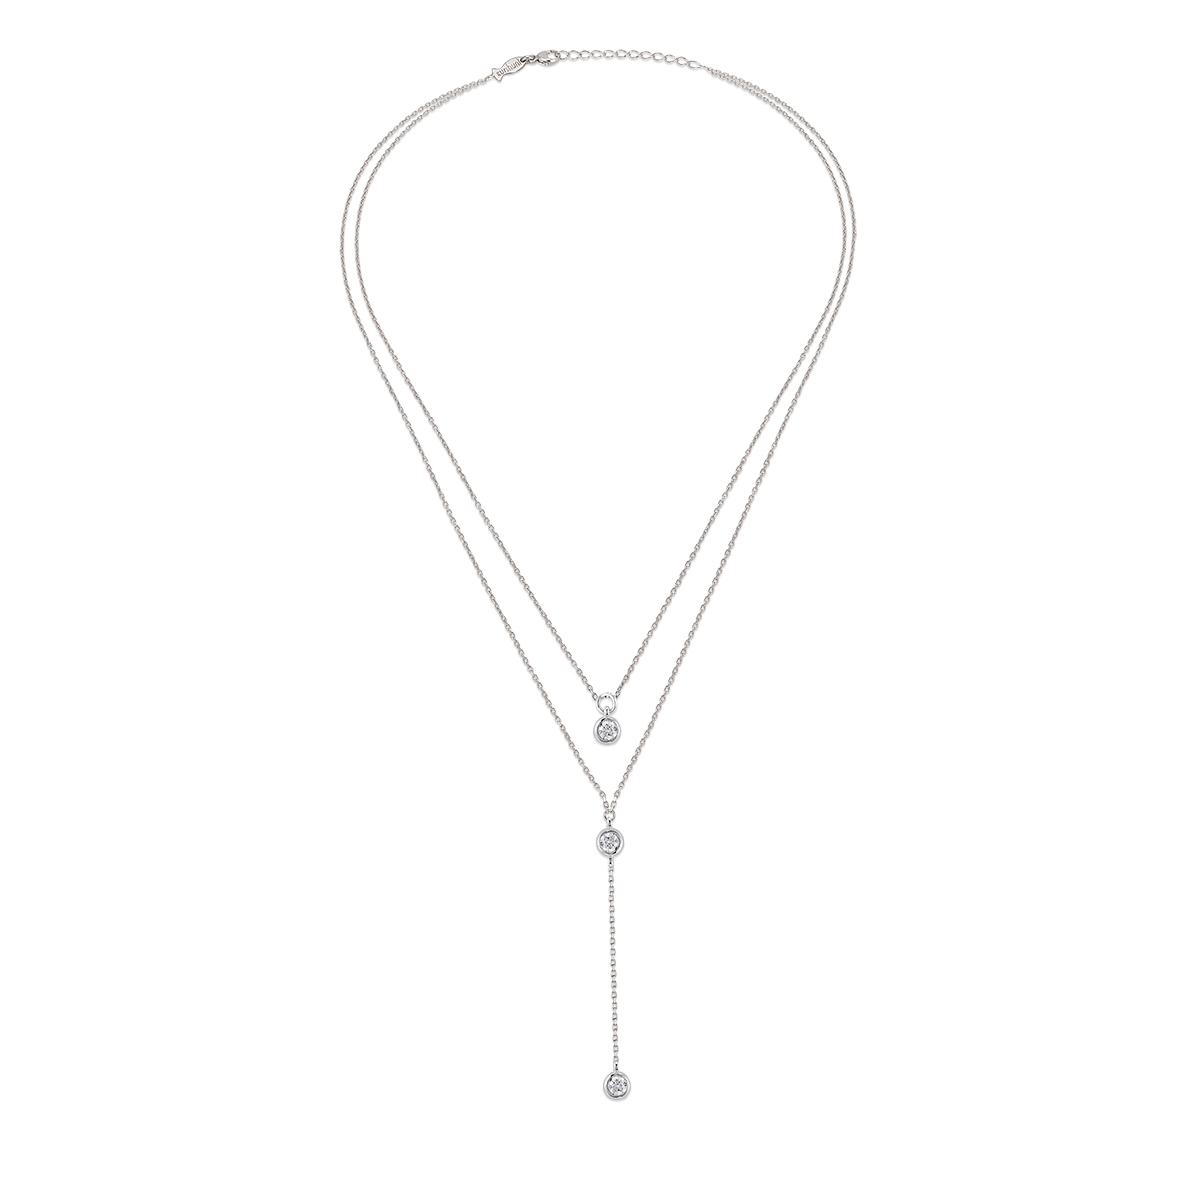 Glint(Duo), Sterling Silver Necklace.